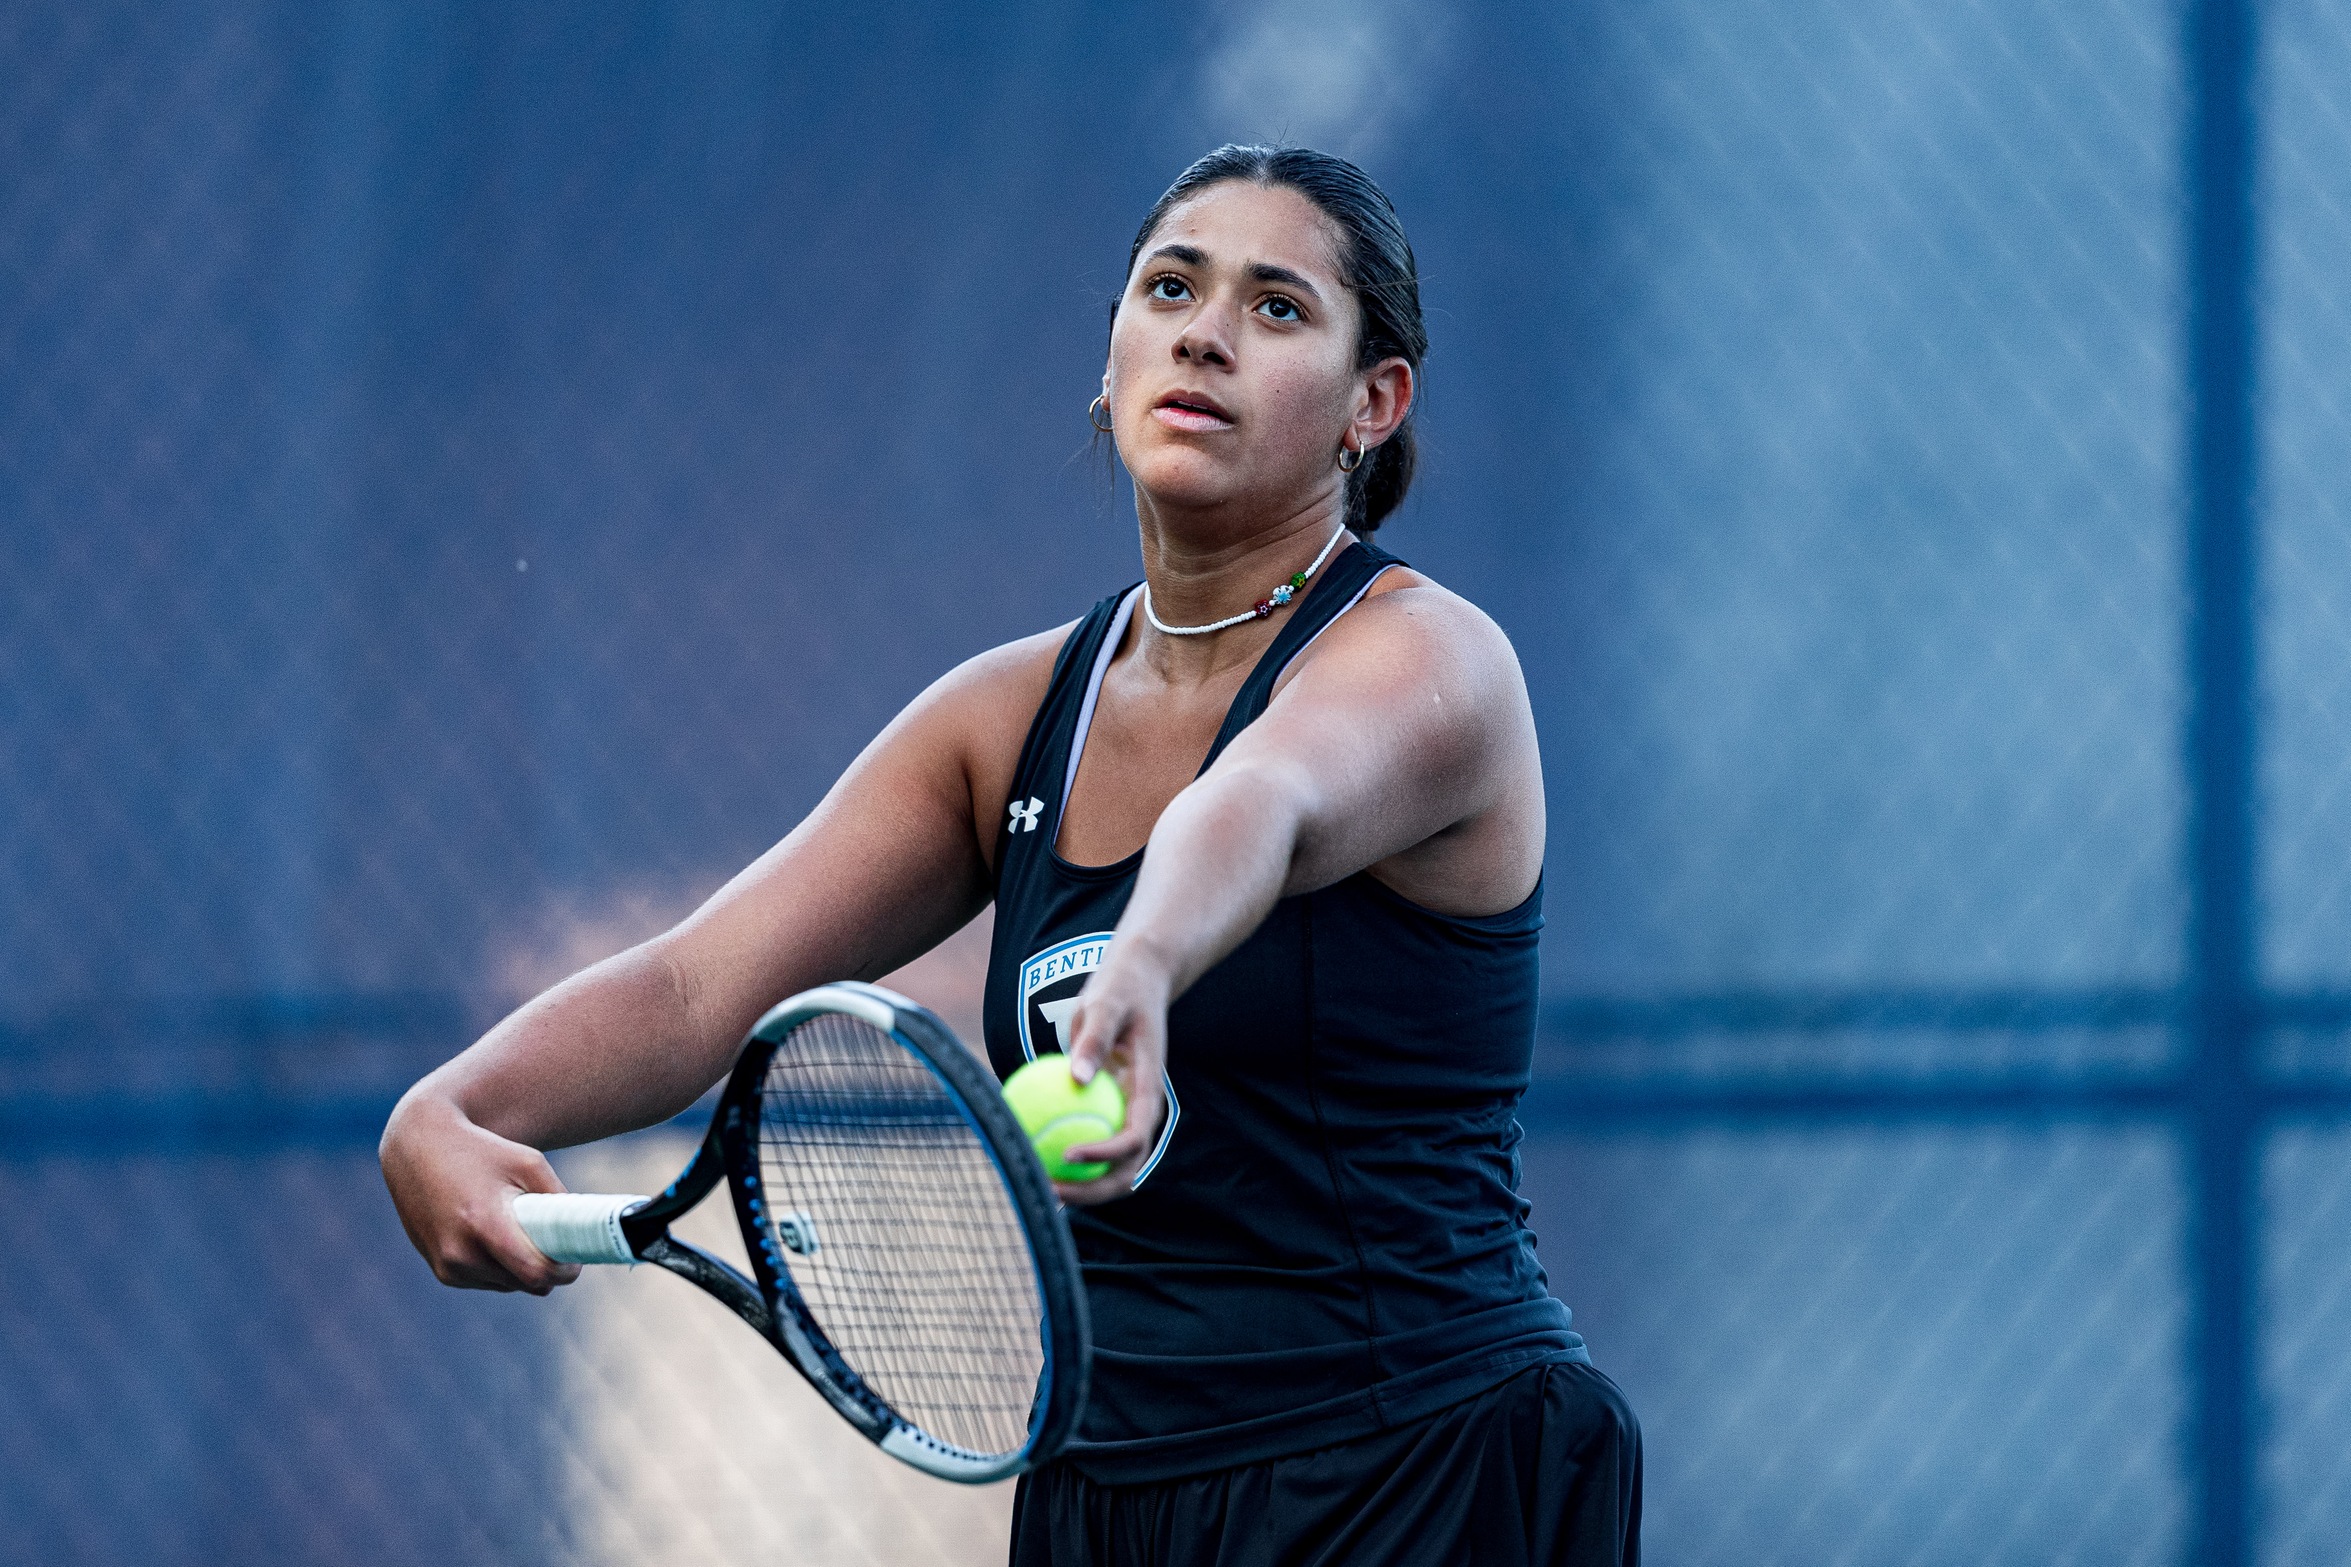 Mella Wins in Singles vs. Rochester on Day Two of Florida Trip